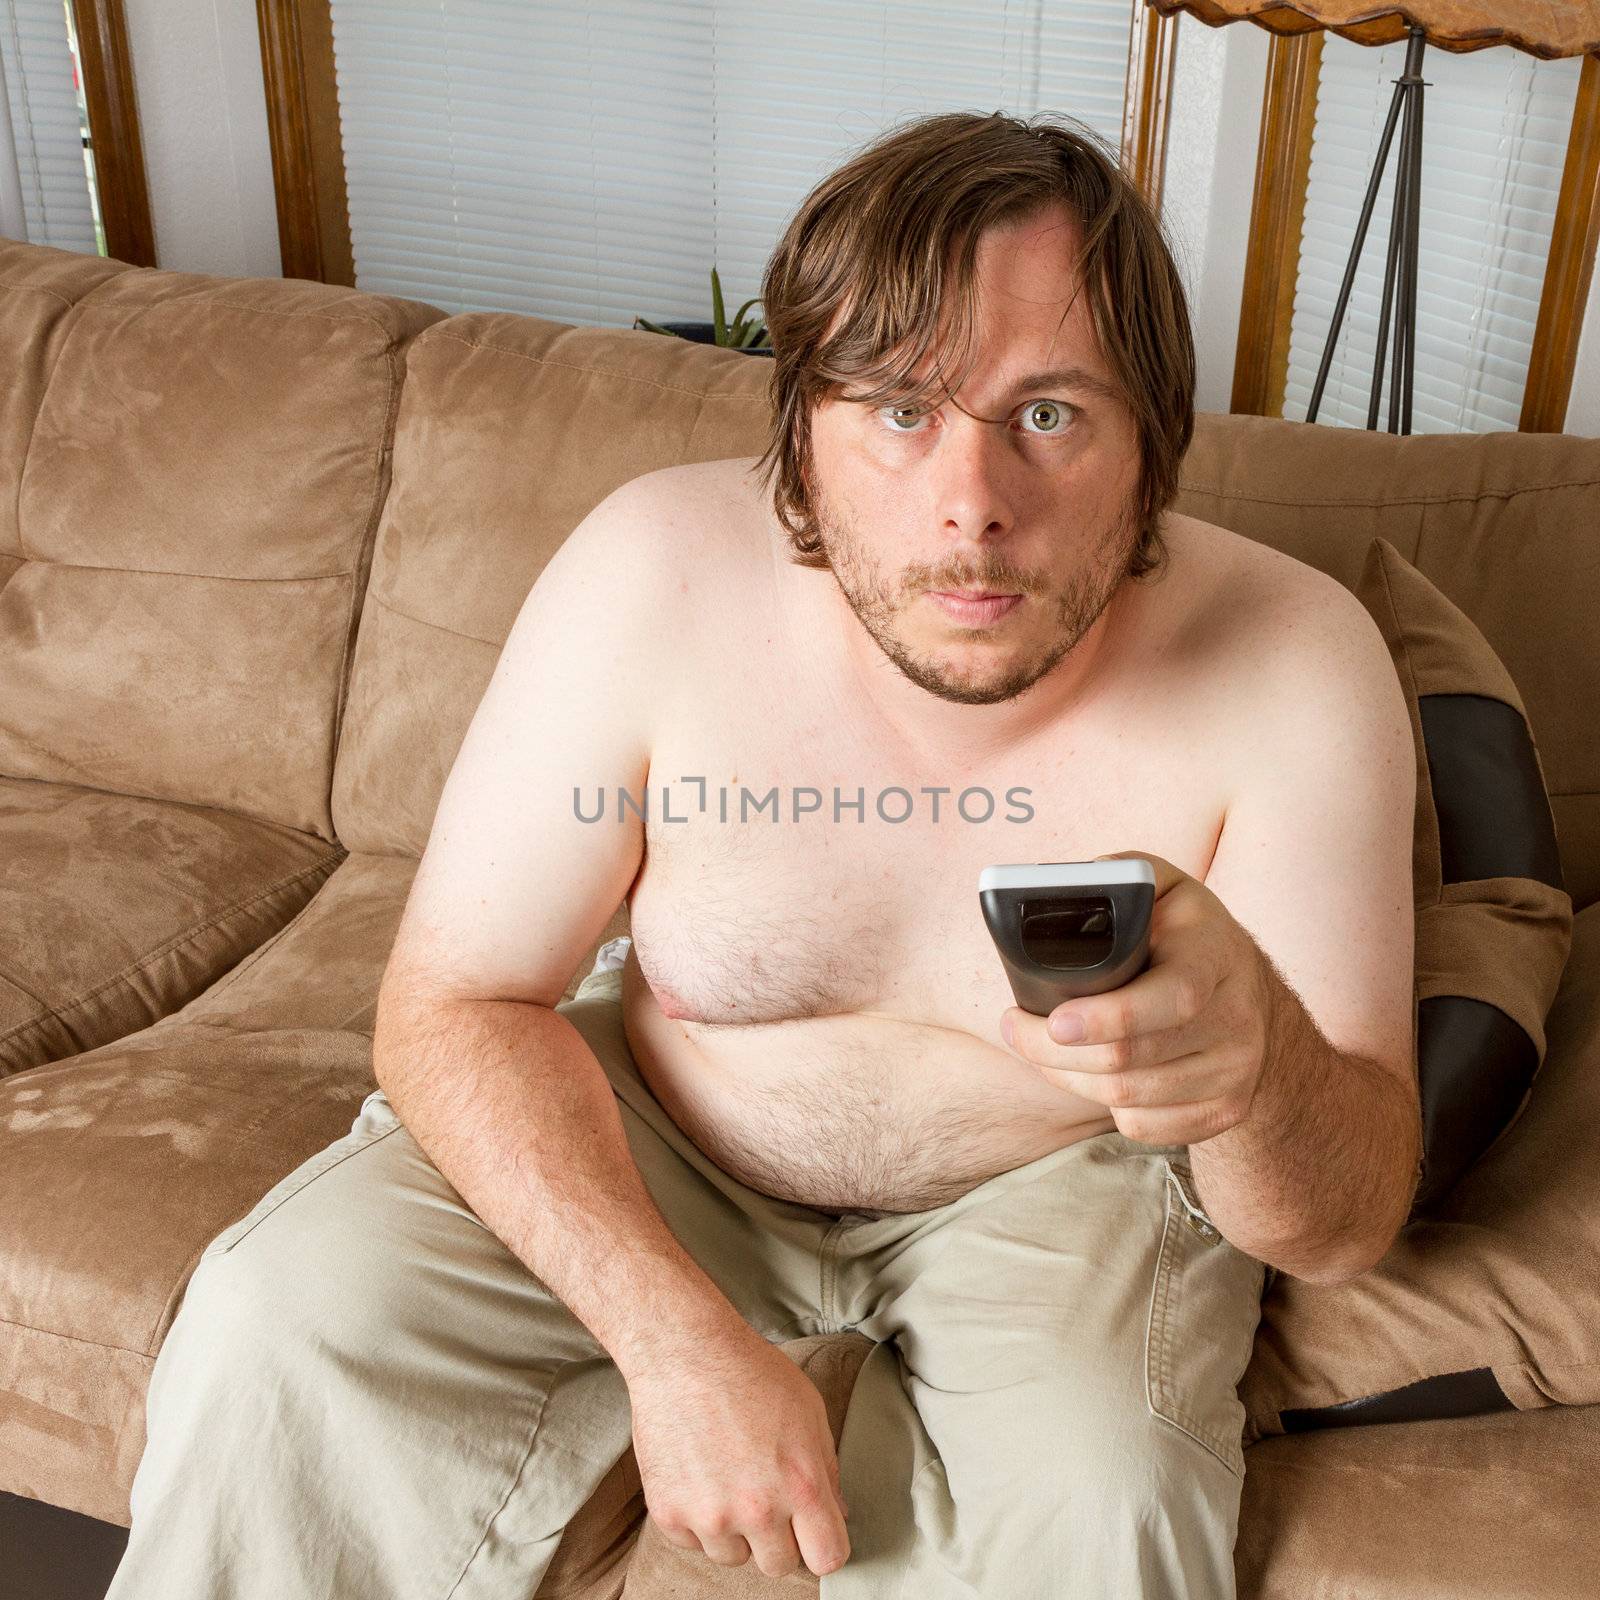 Man playing the lazy role of the couch potato